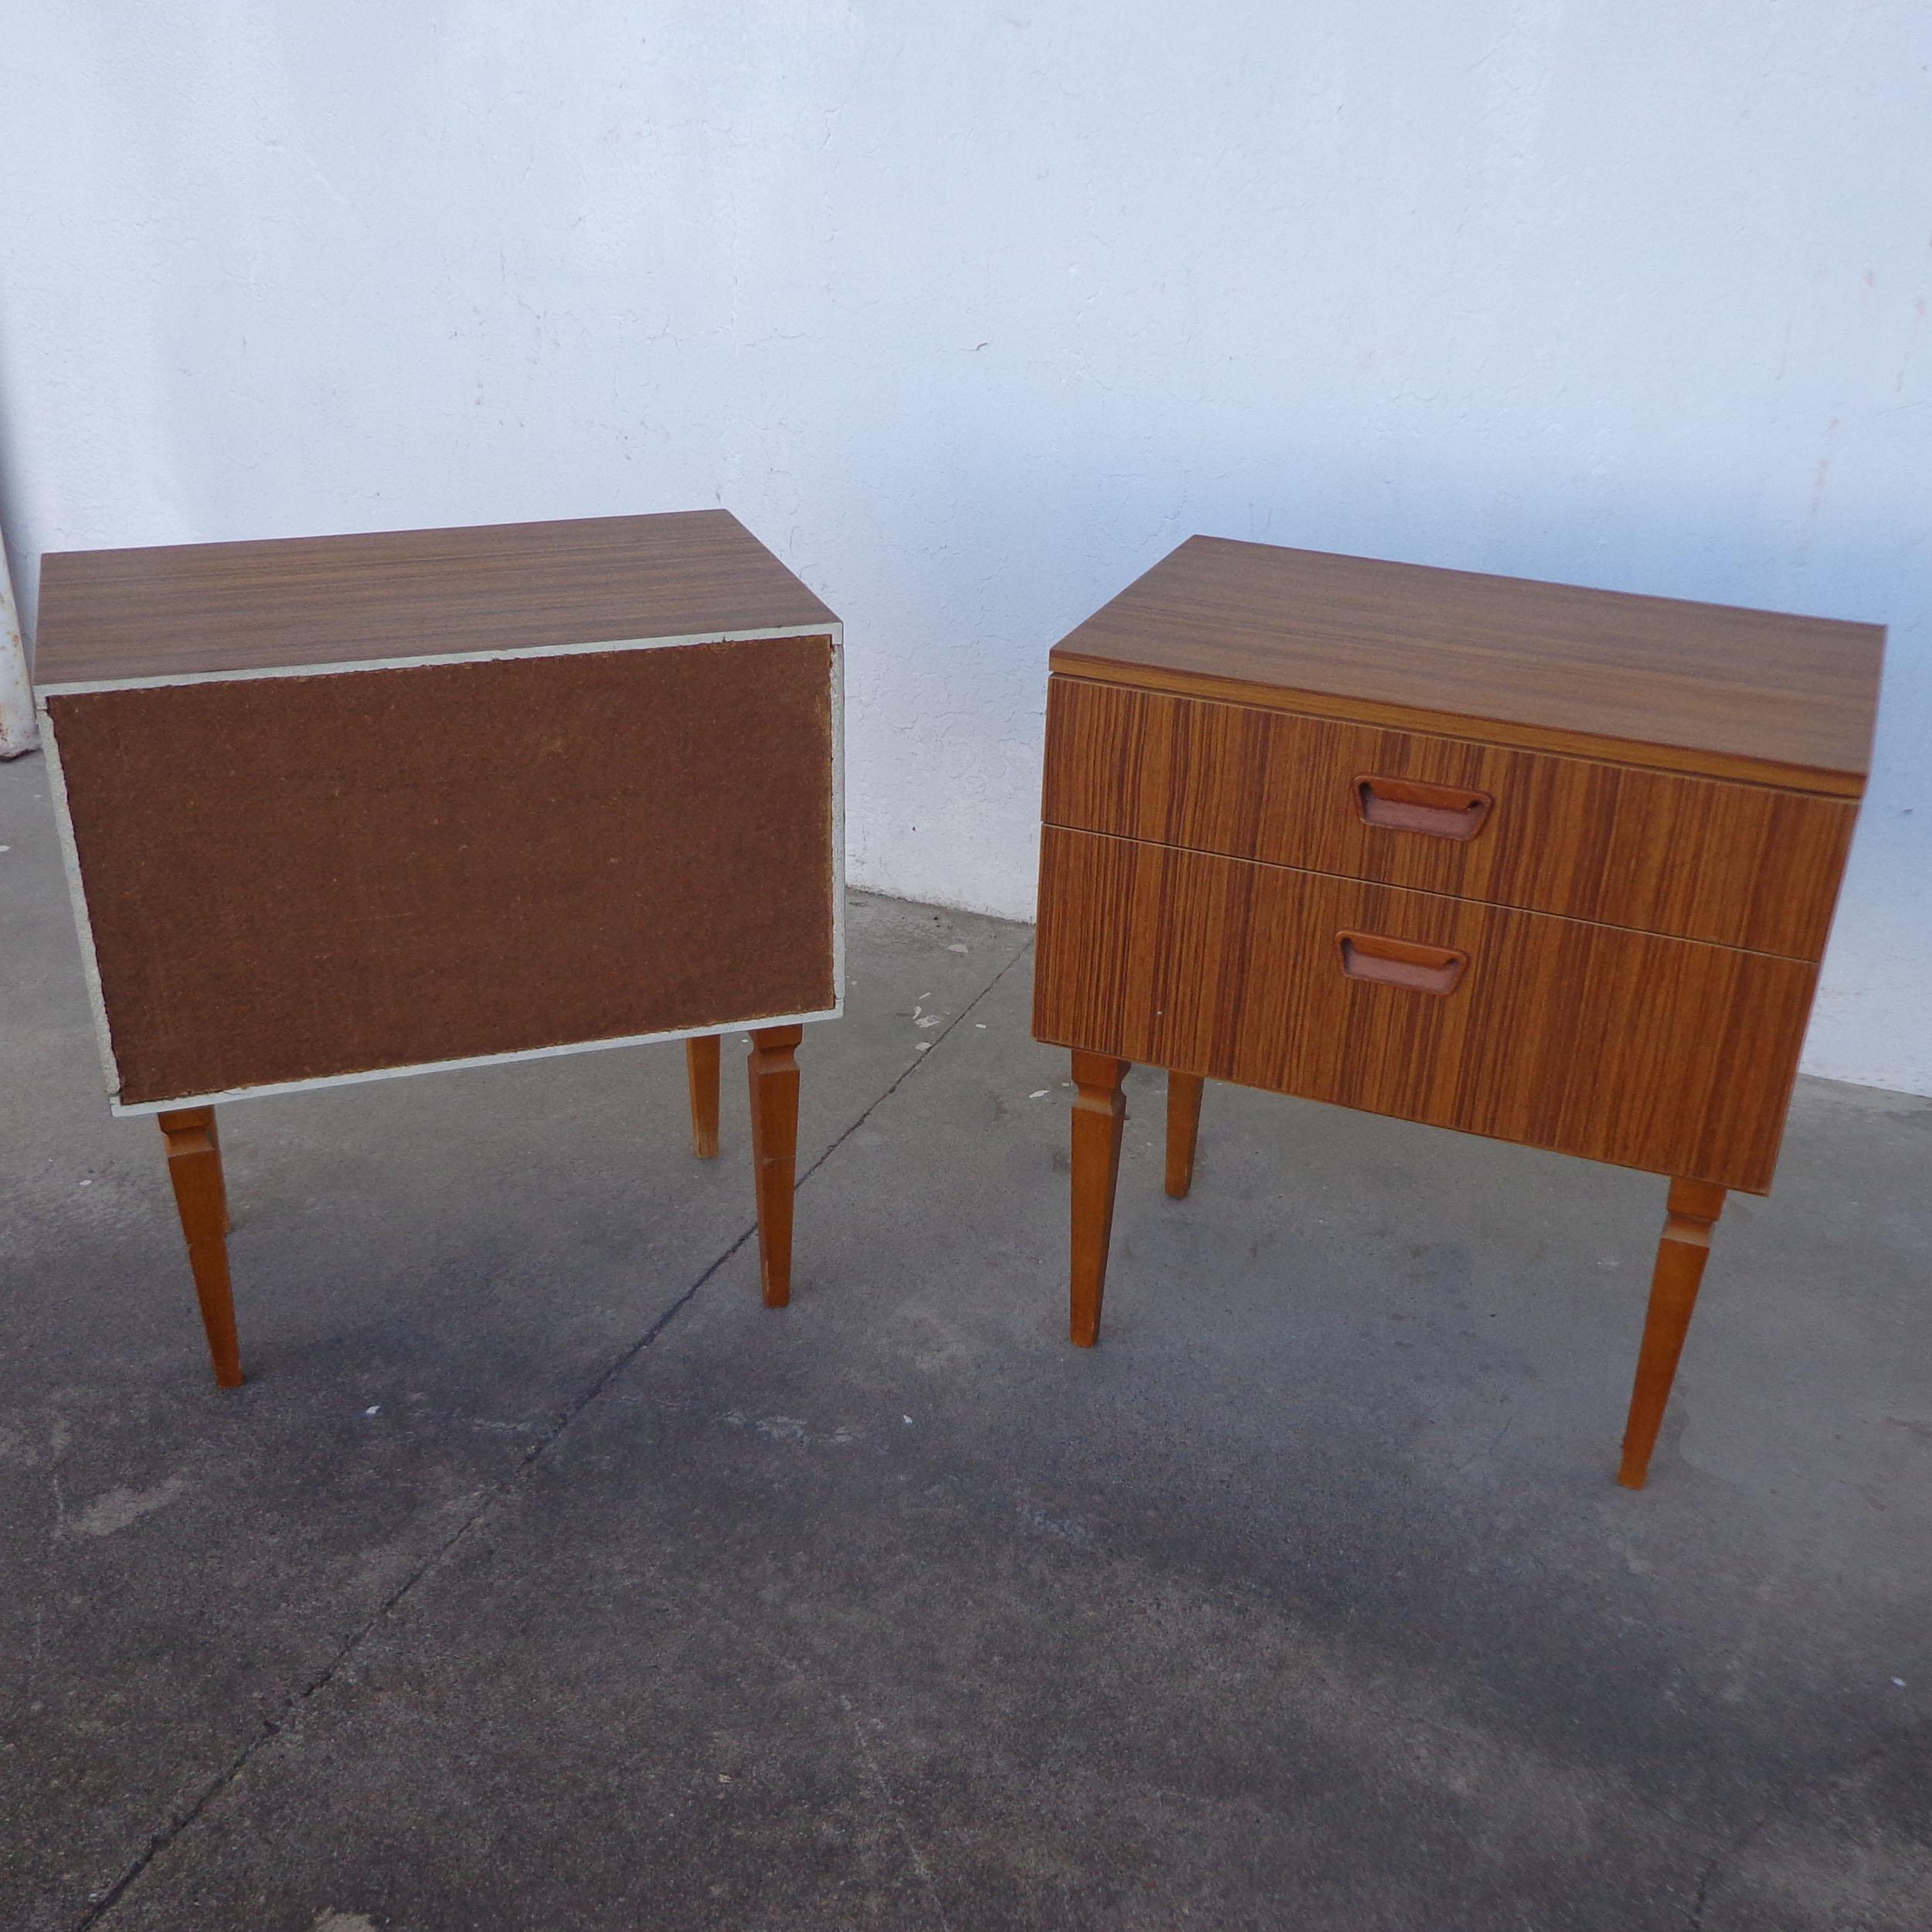 Pair of mid century teak nightstands

Mid century pair of bedside tables in teak made in Europe. Each nightstand includes two drawers
with inset handles. Price is for the pair.


22